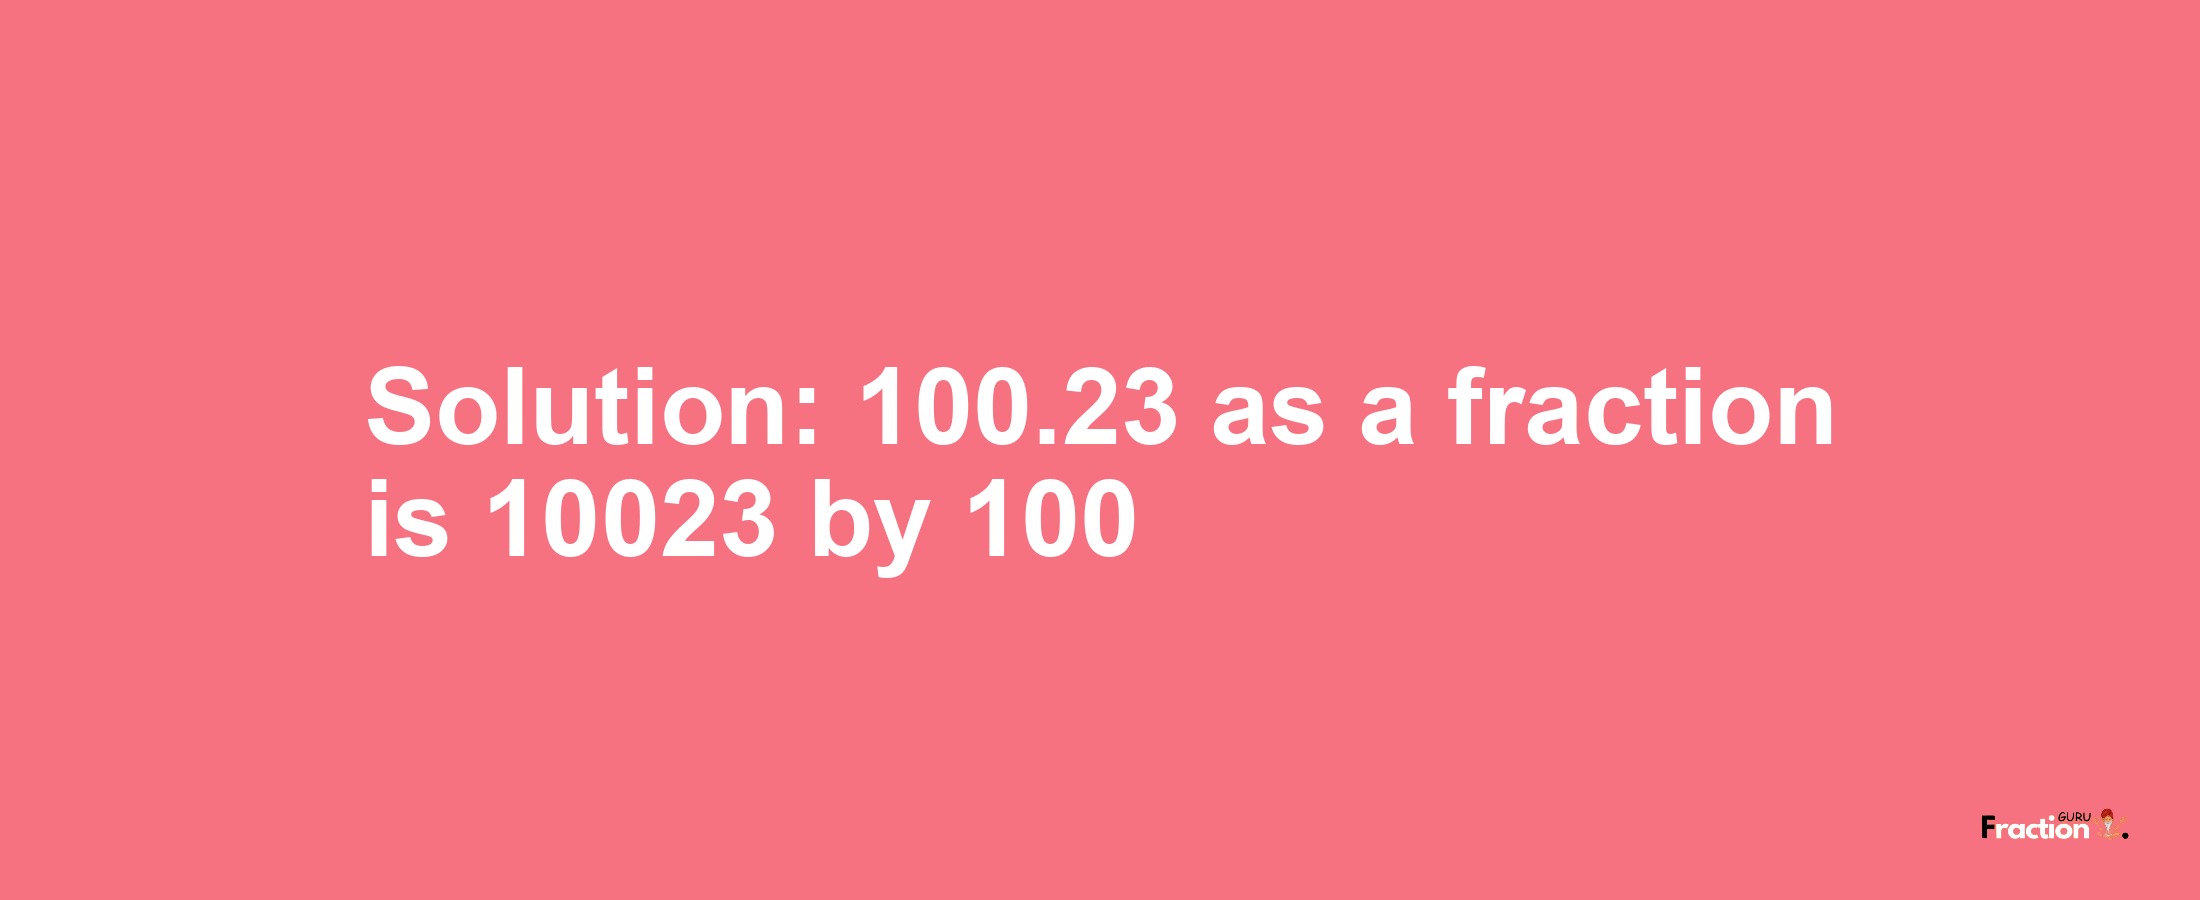 Solution:100.23 as a fraction is 10023/100